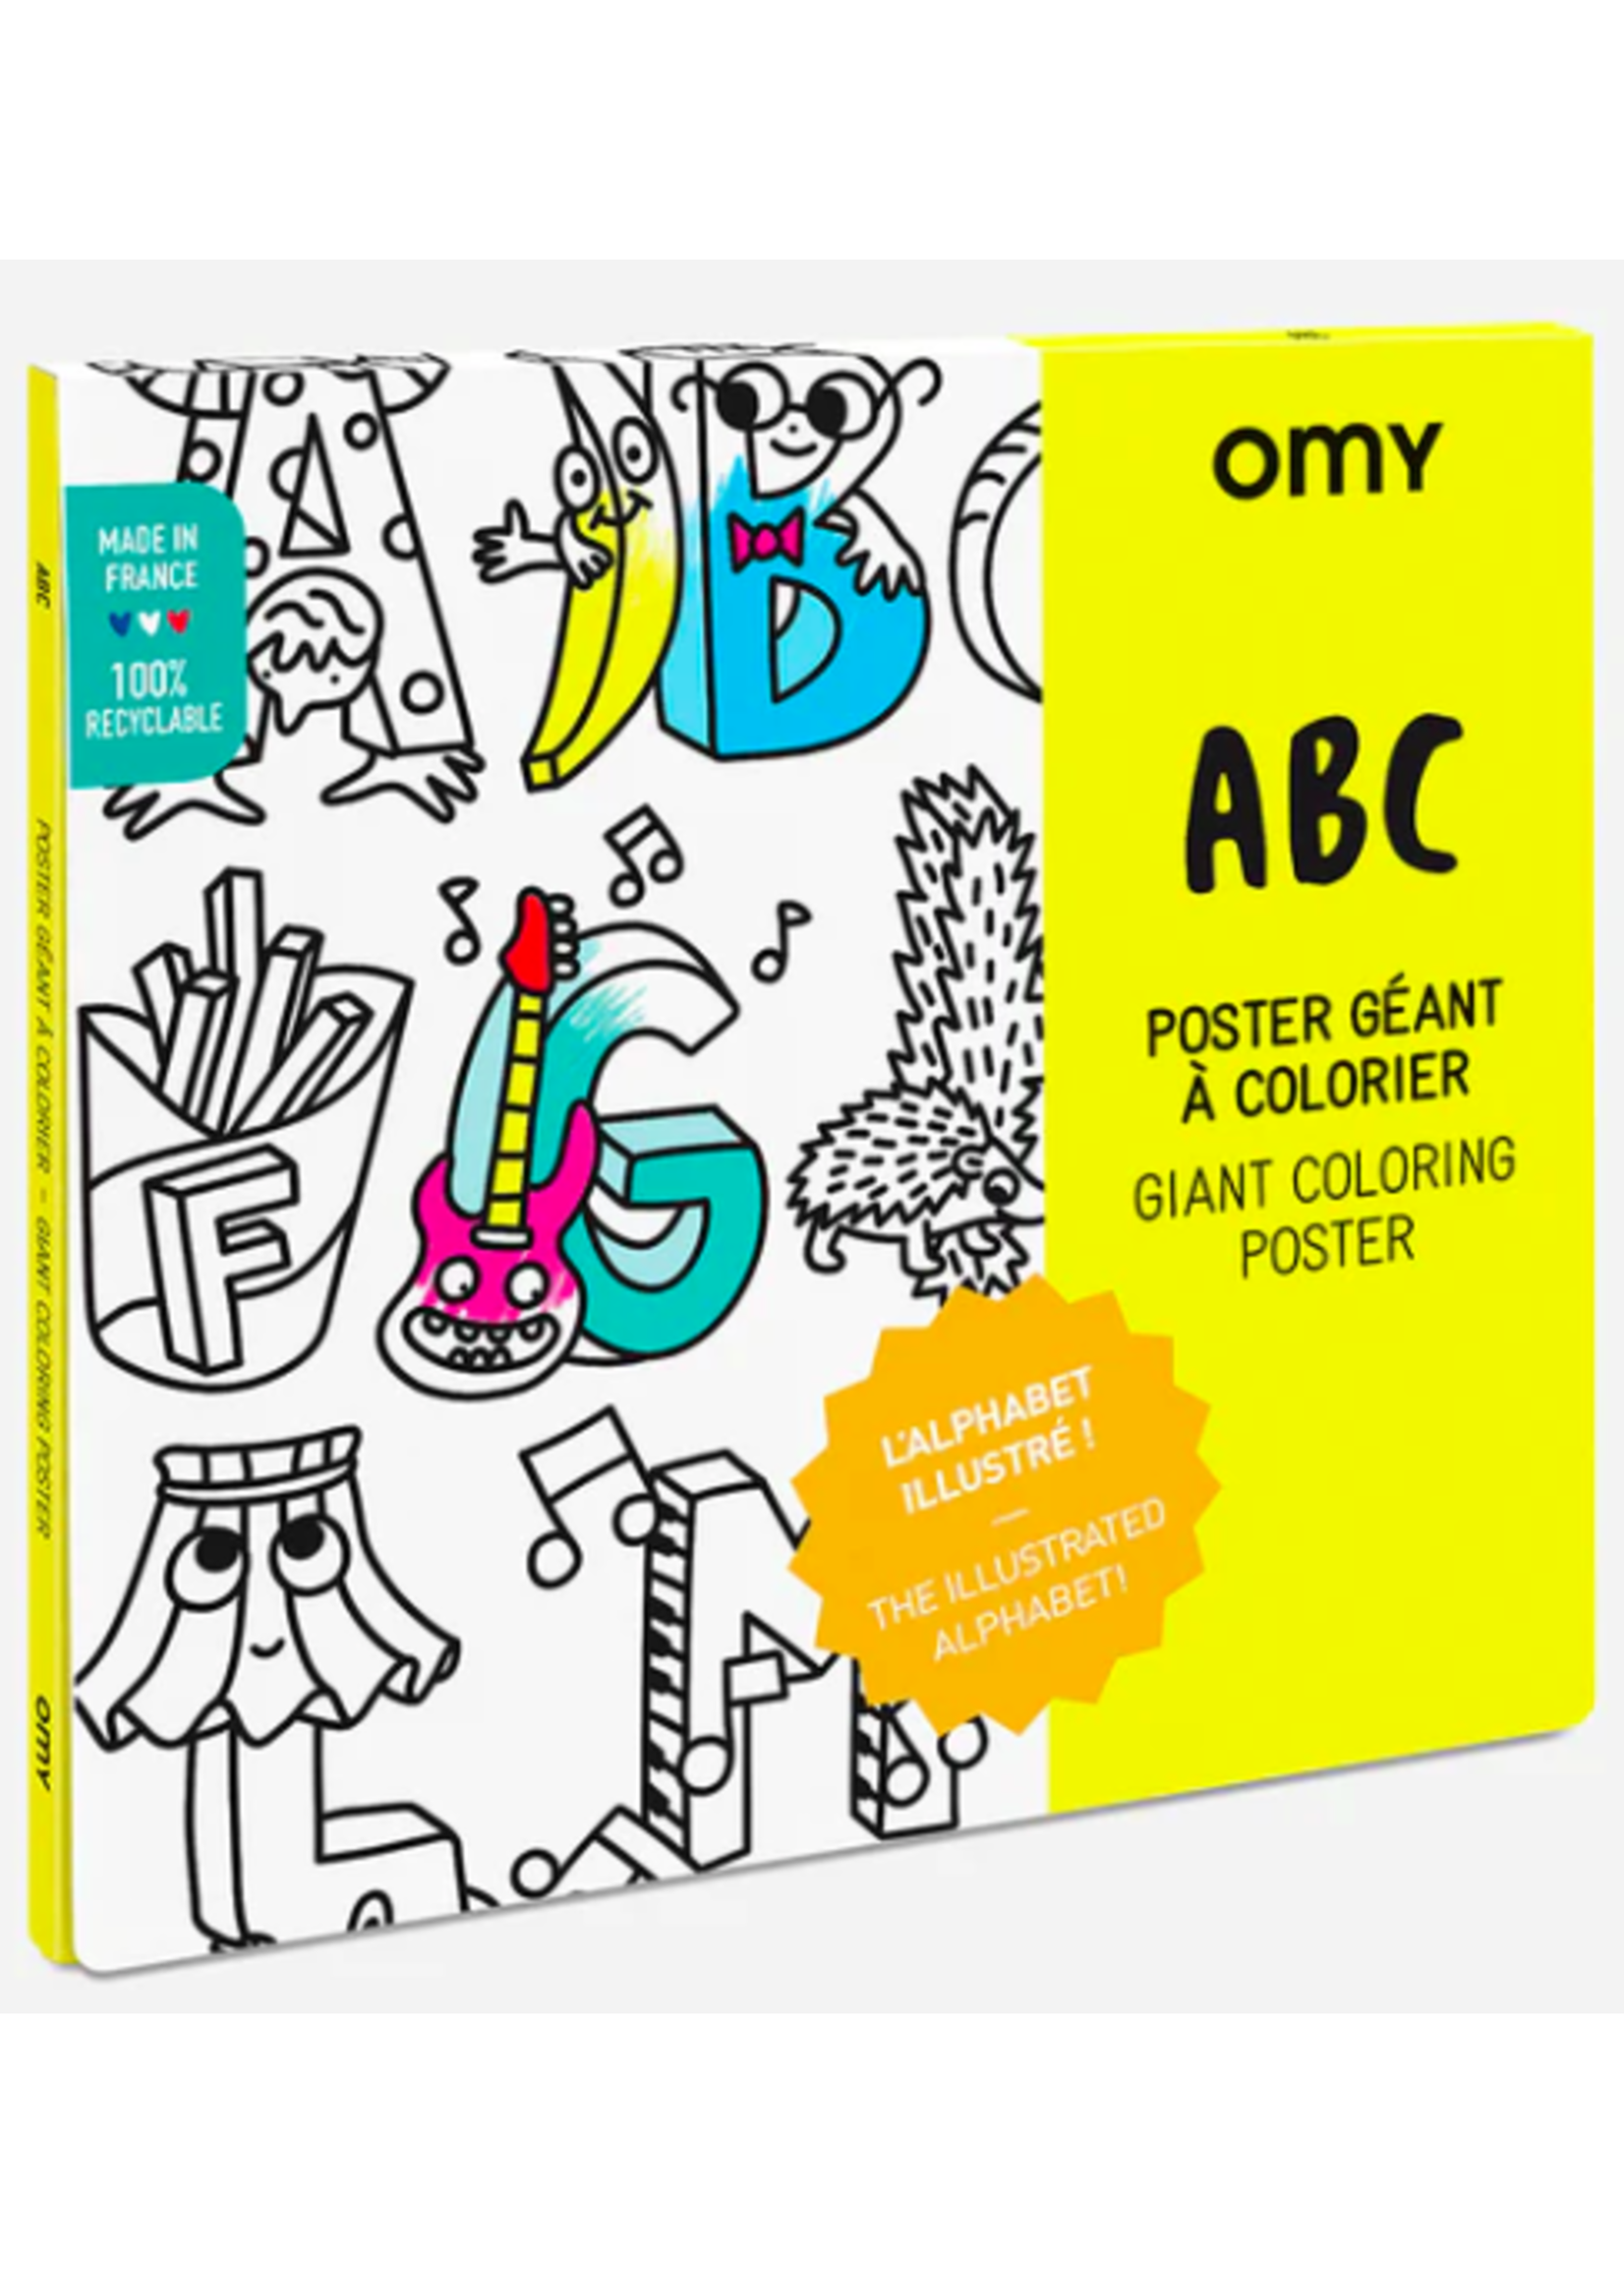 ABC Giant Coloring Poster